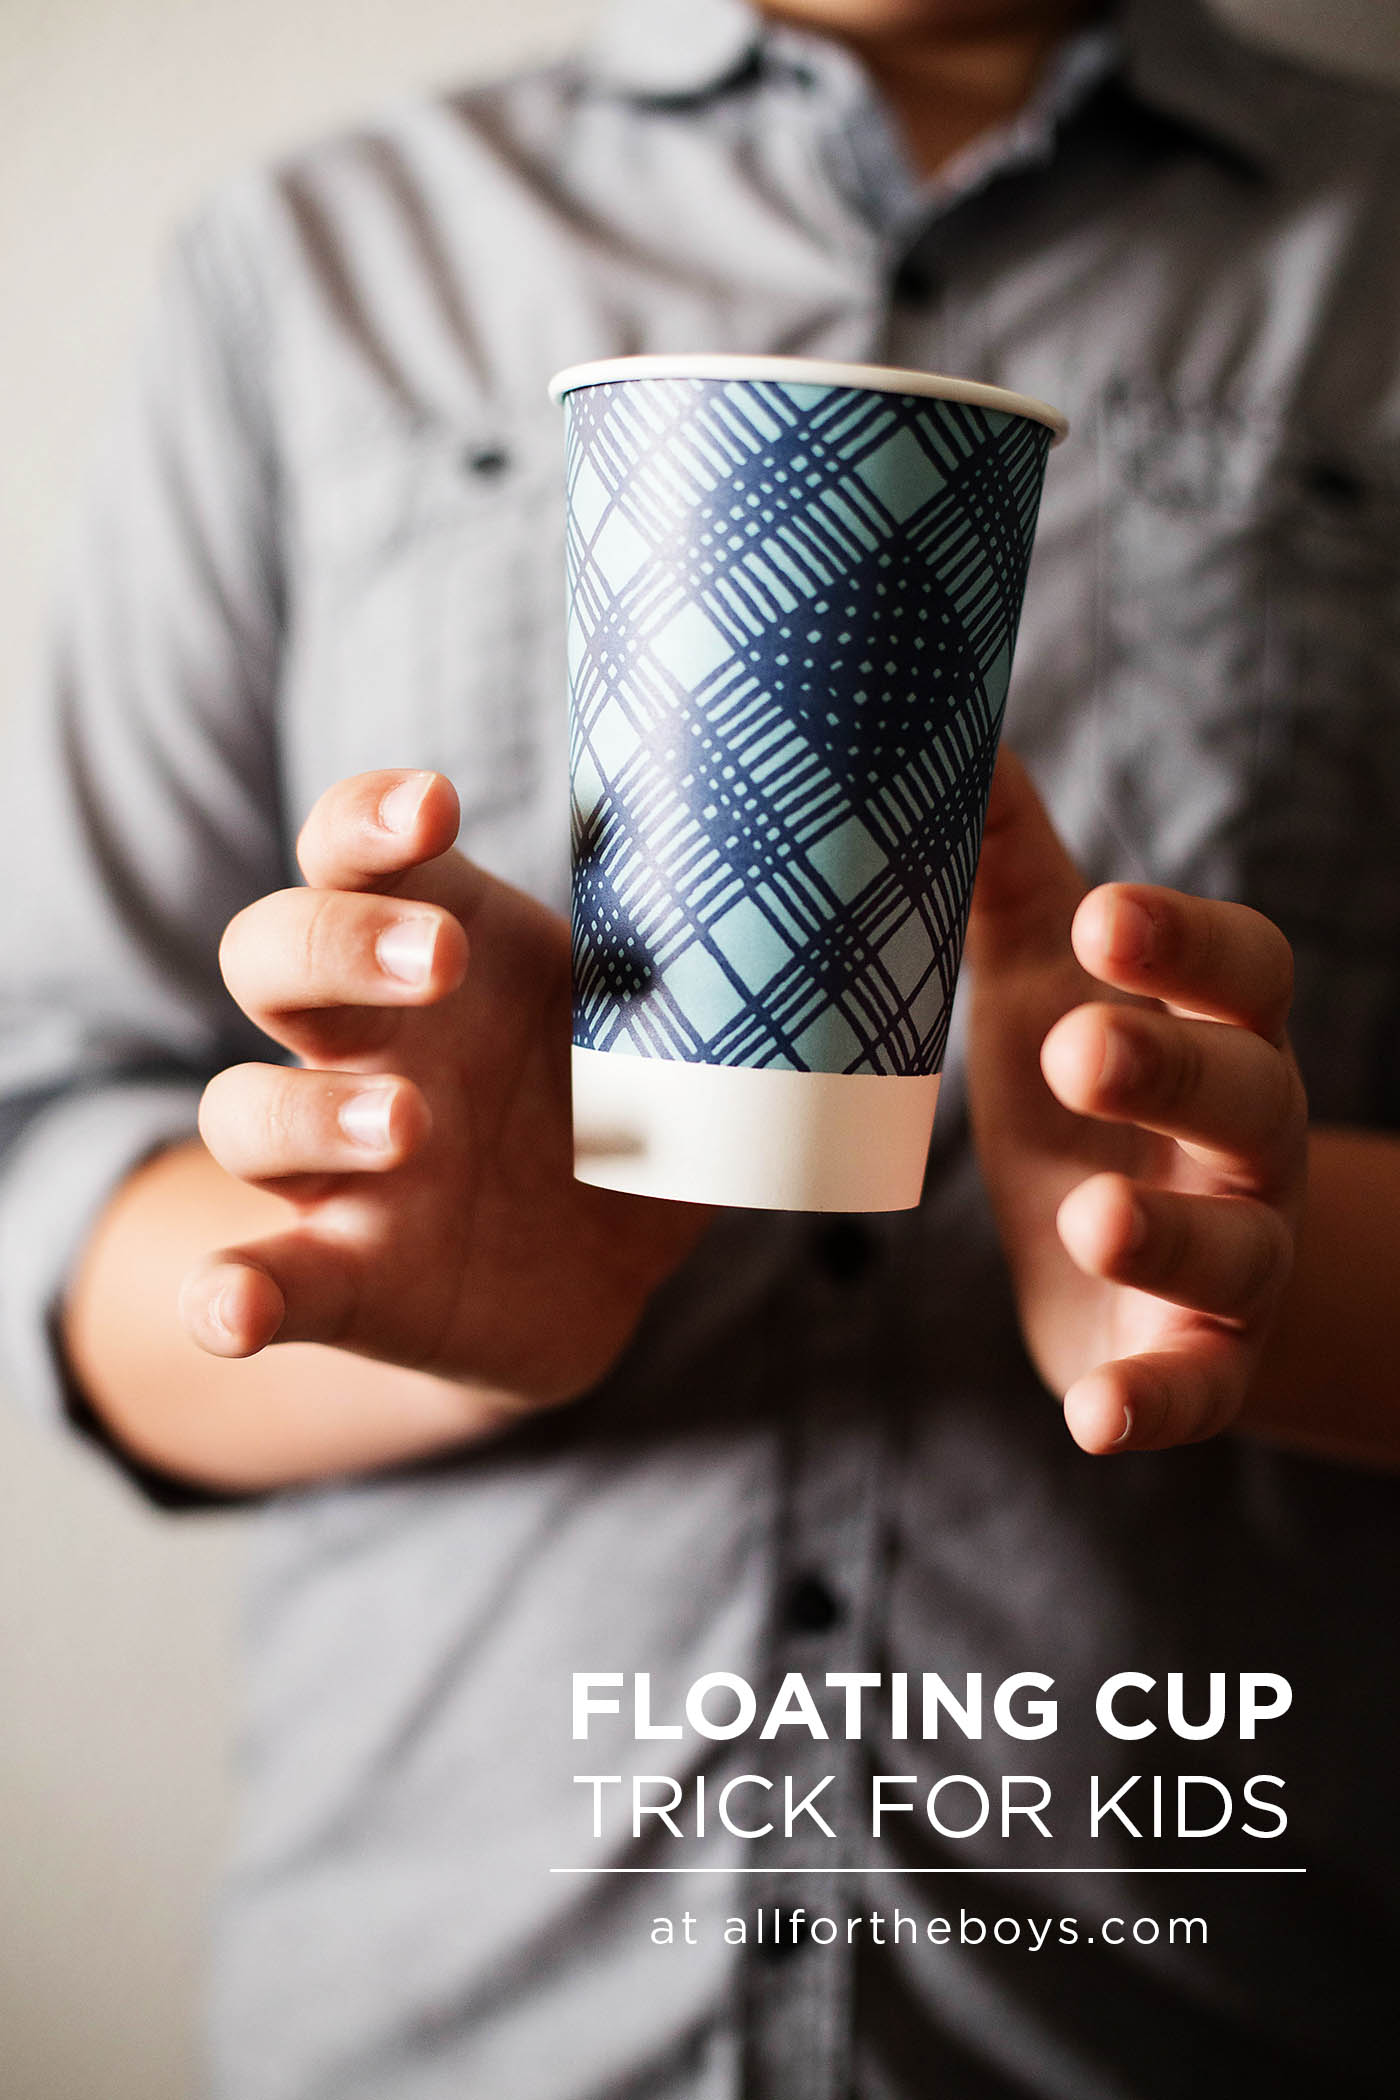 Simple floating cup party trick for kids to learn!